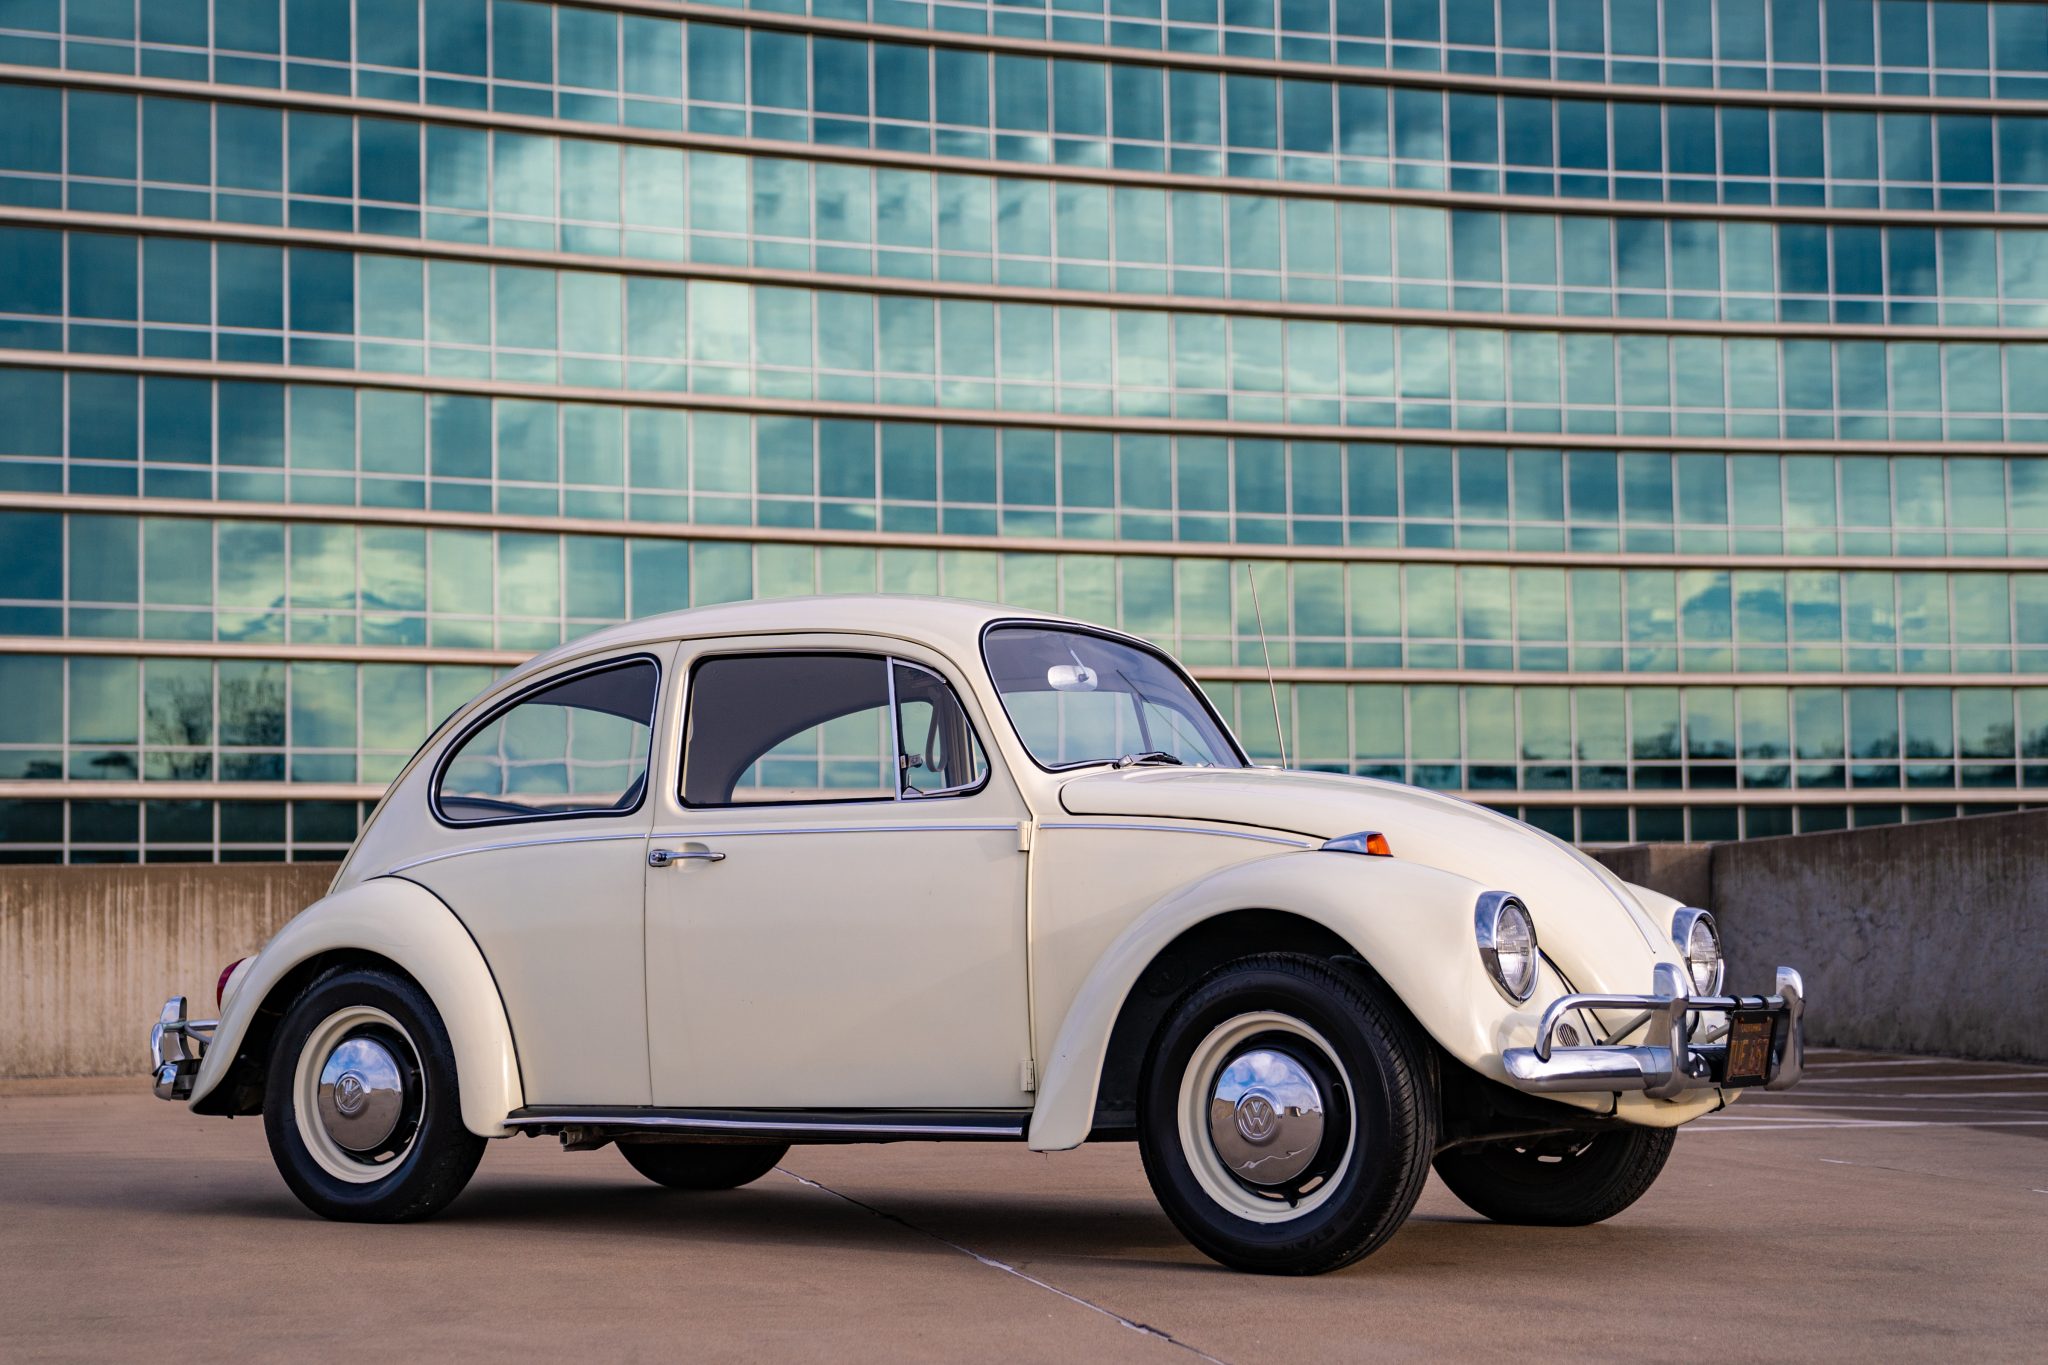 This Original-Owner 1967 Volkswagen Beetle Is Offered at No